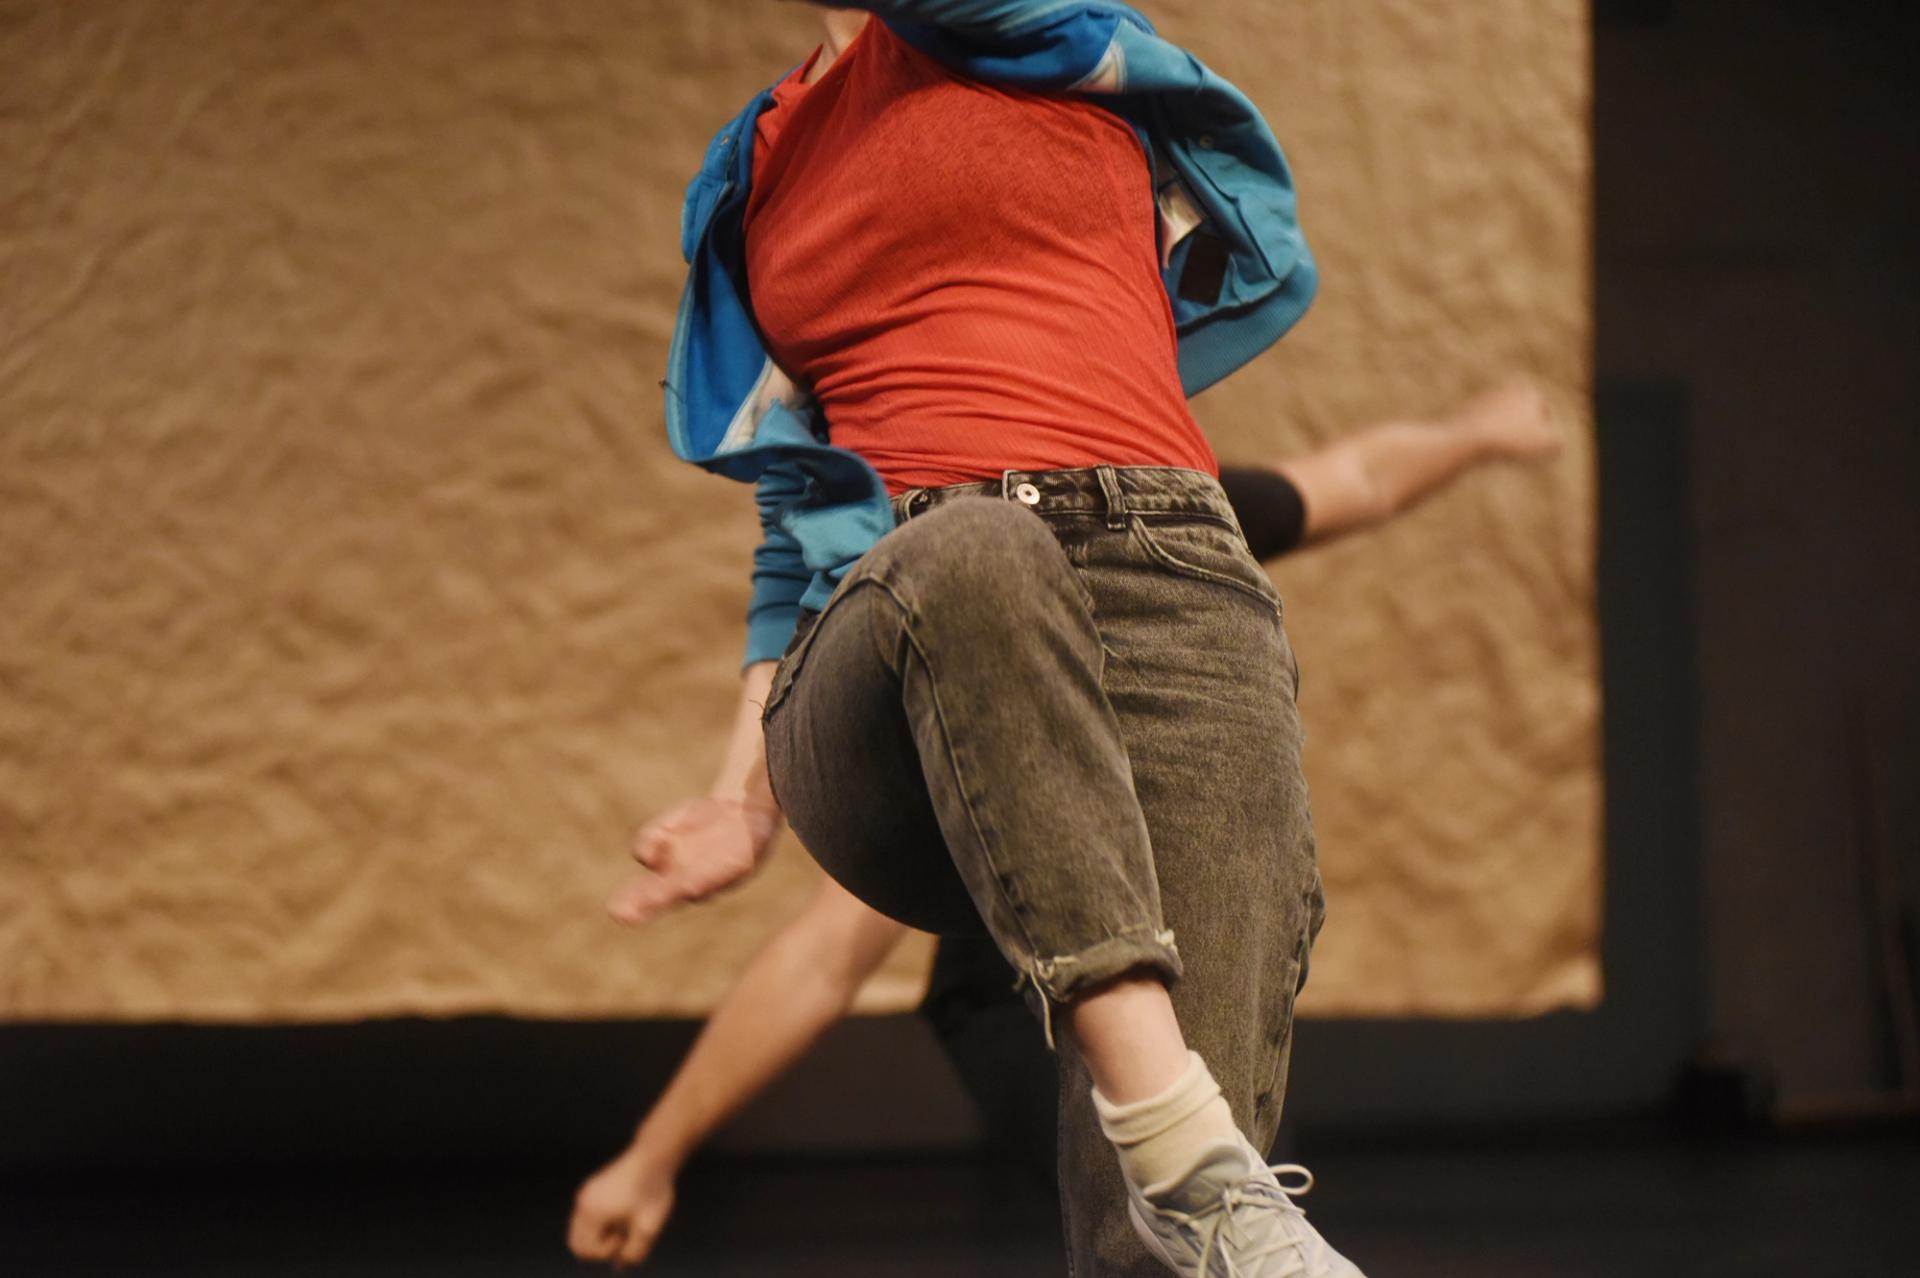 Ingrid is dancing, is wearing a red shirt, jeans and a blue adidas jacket. Her torso is visible against a brown wringkled paper backdrop. 